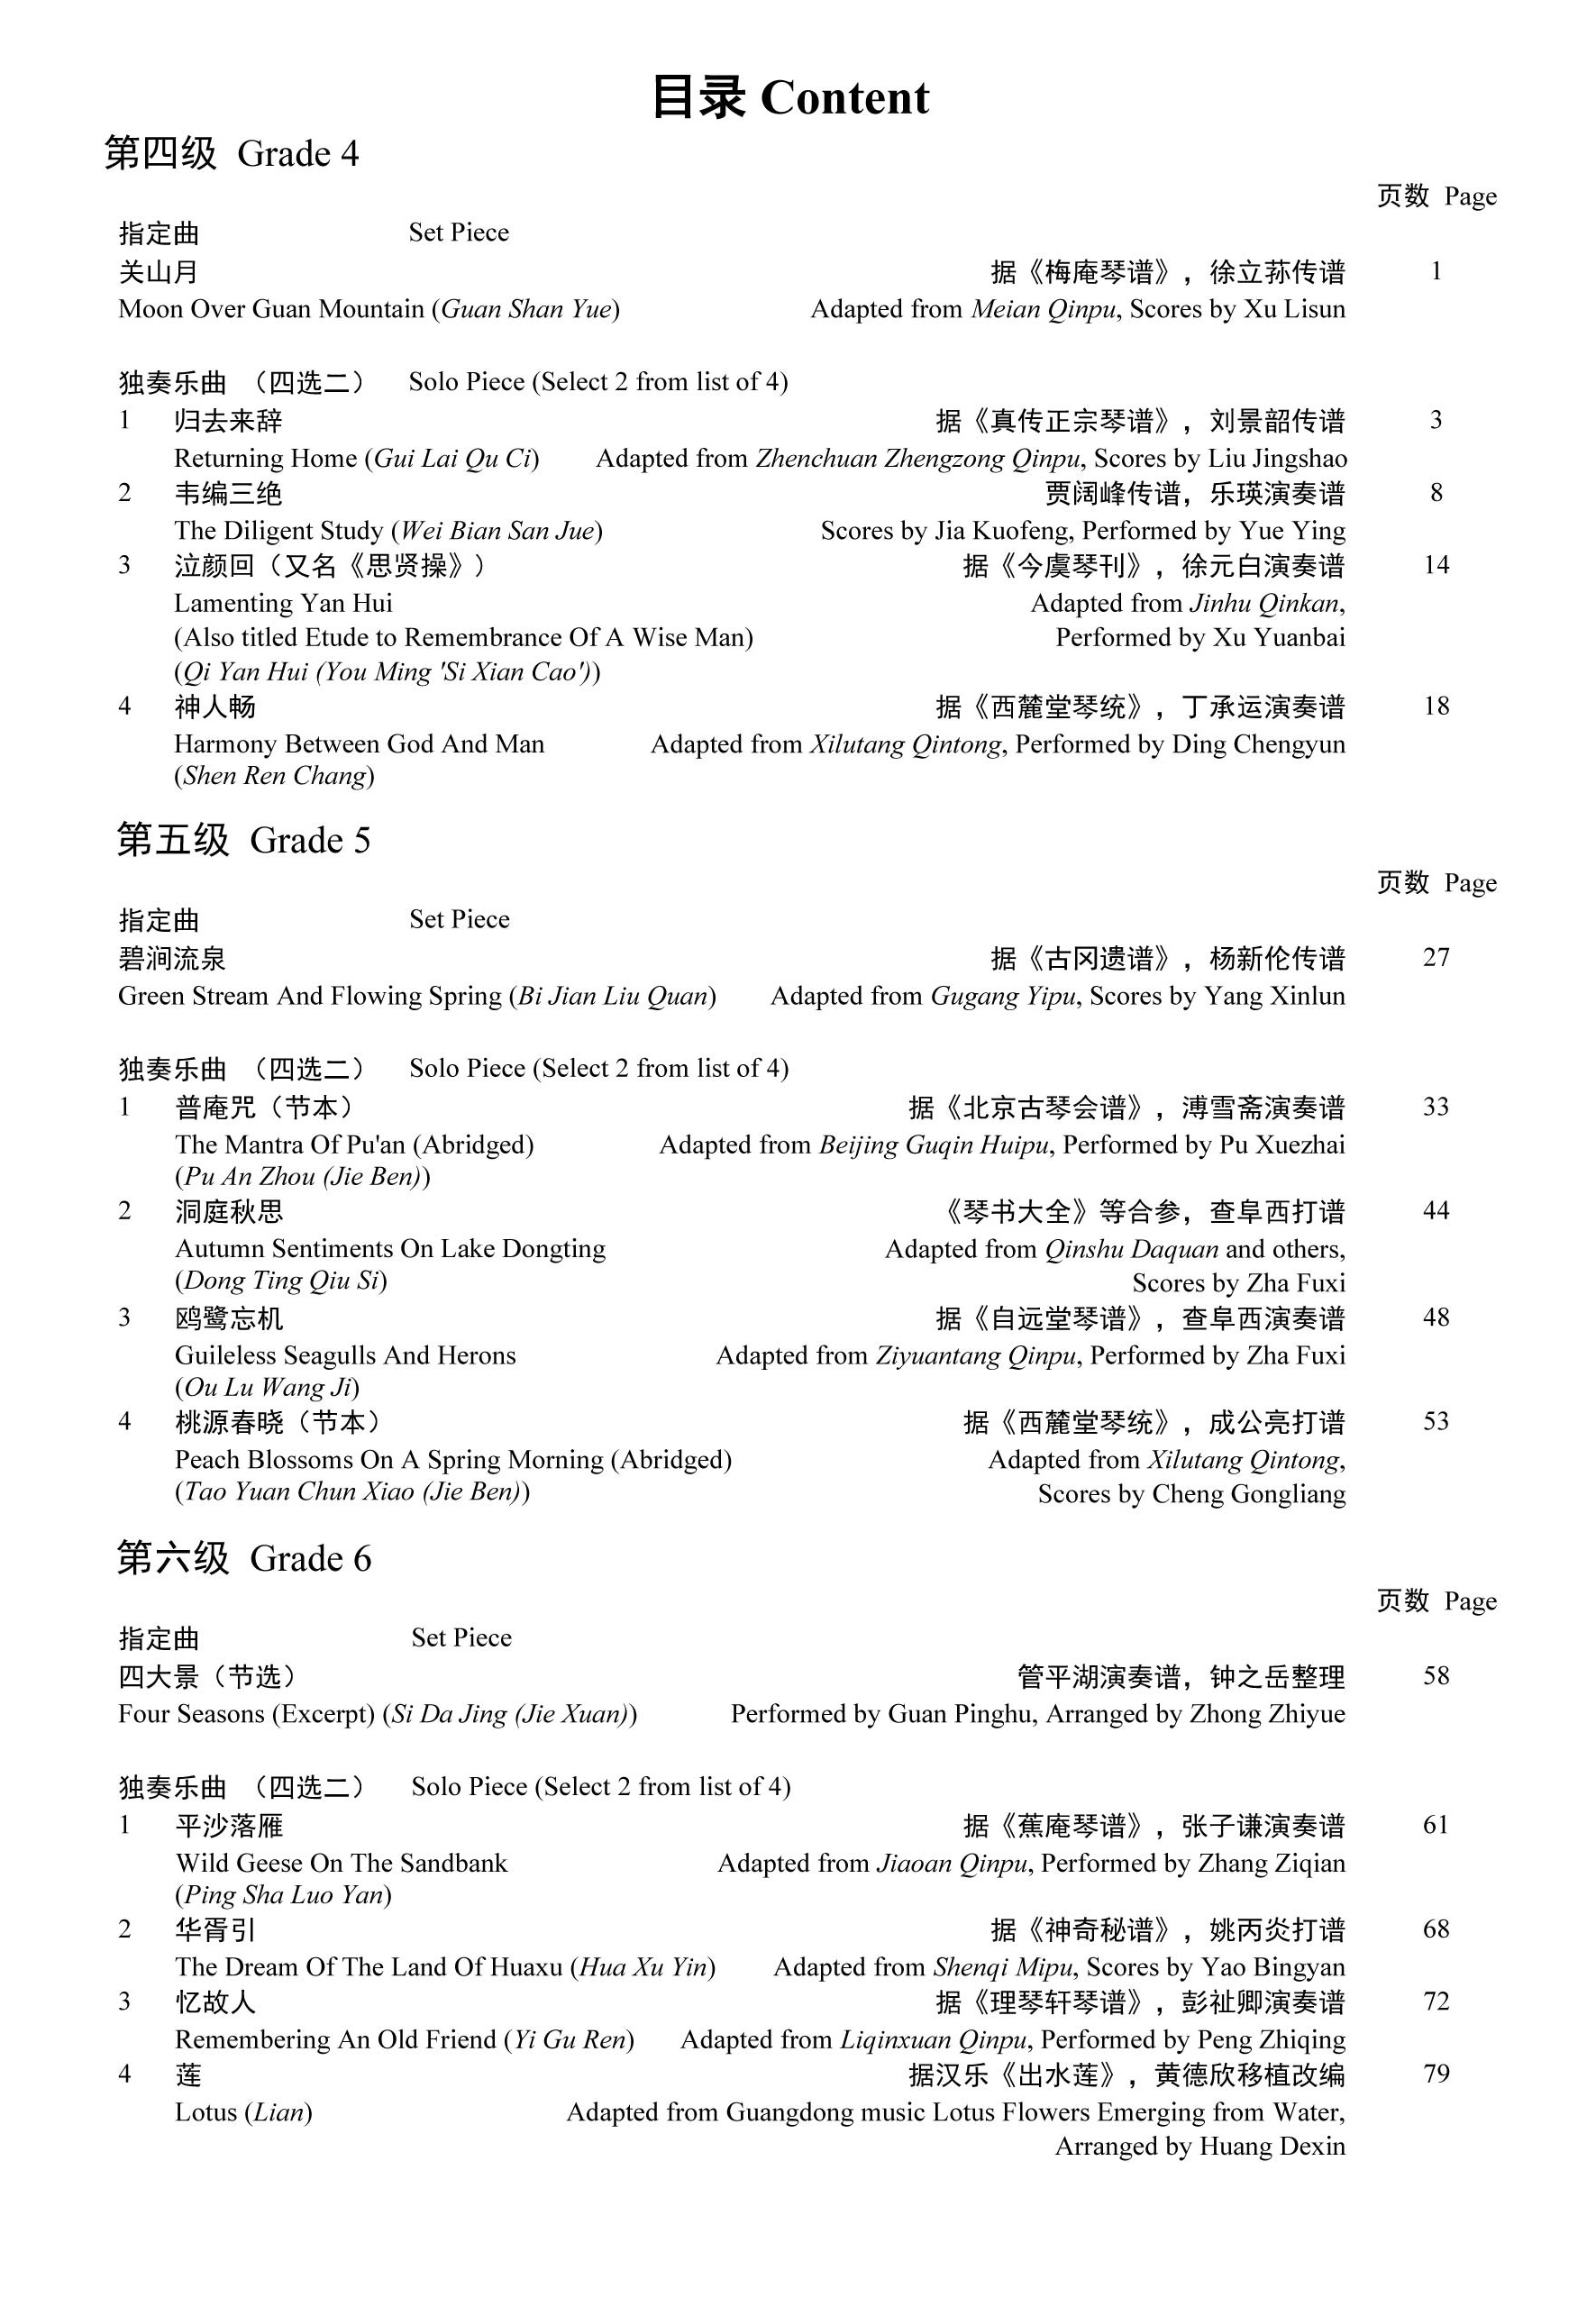 Guqin Grading Examination Book by Teng (Intermediate Grade 4-6) Content Page